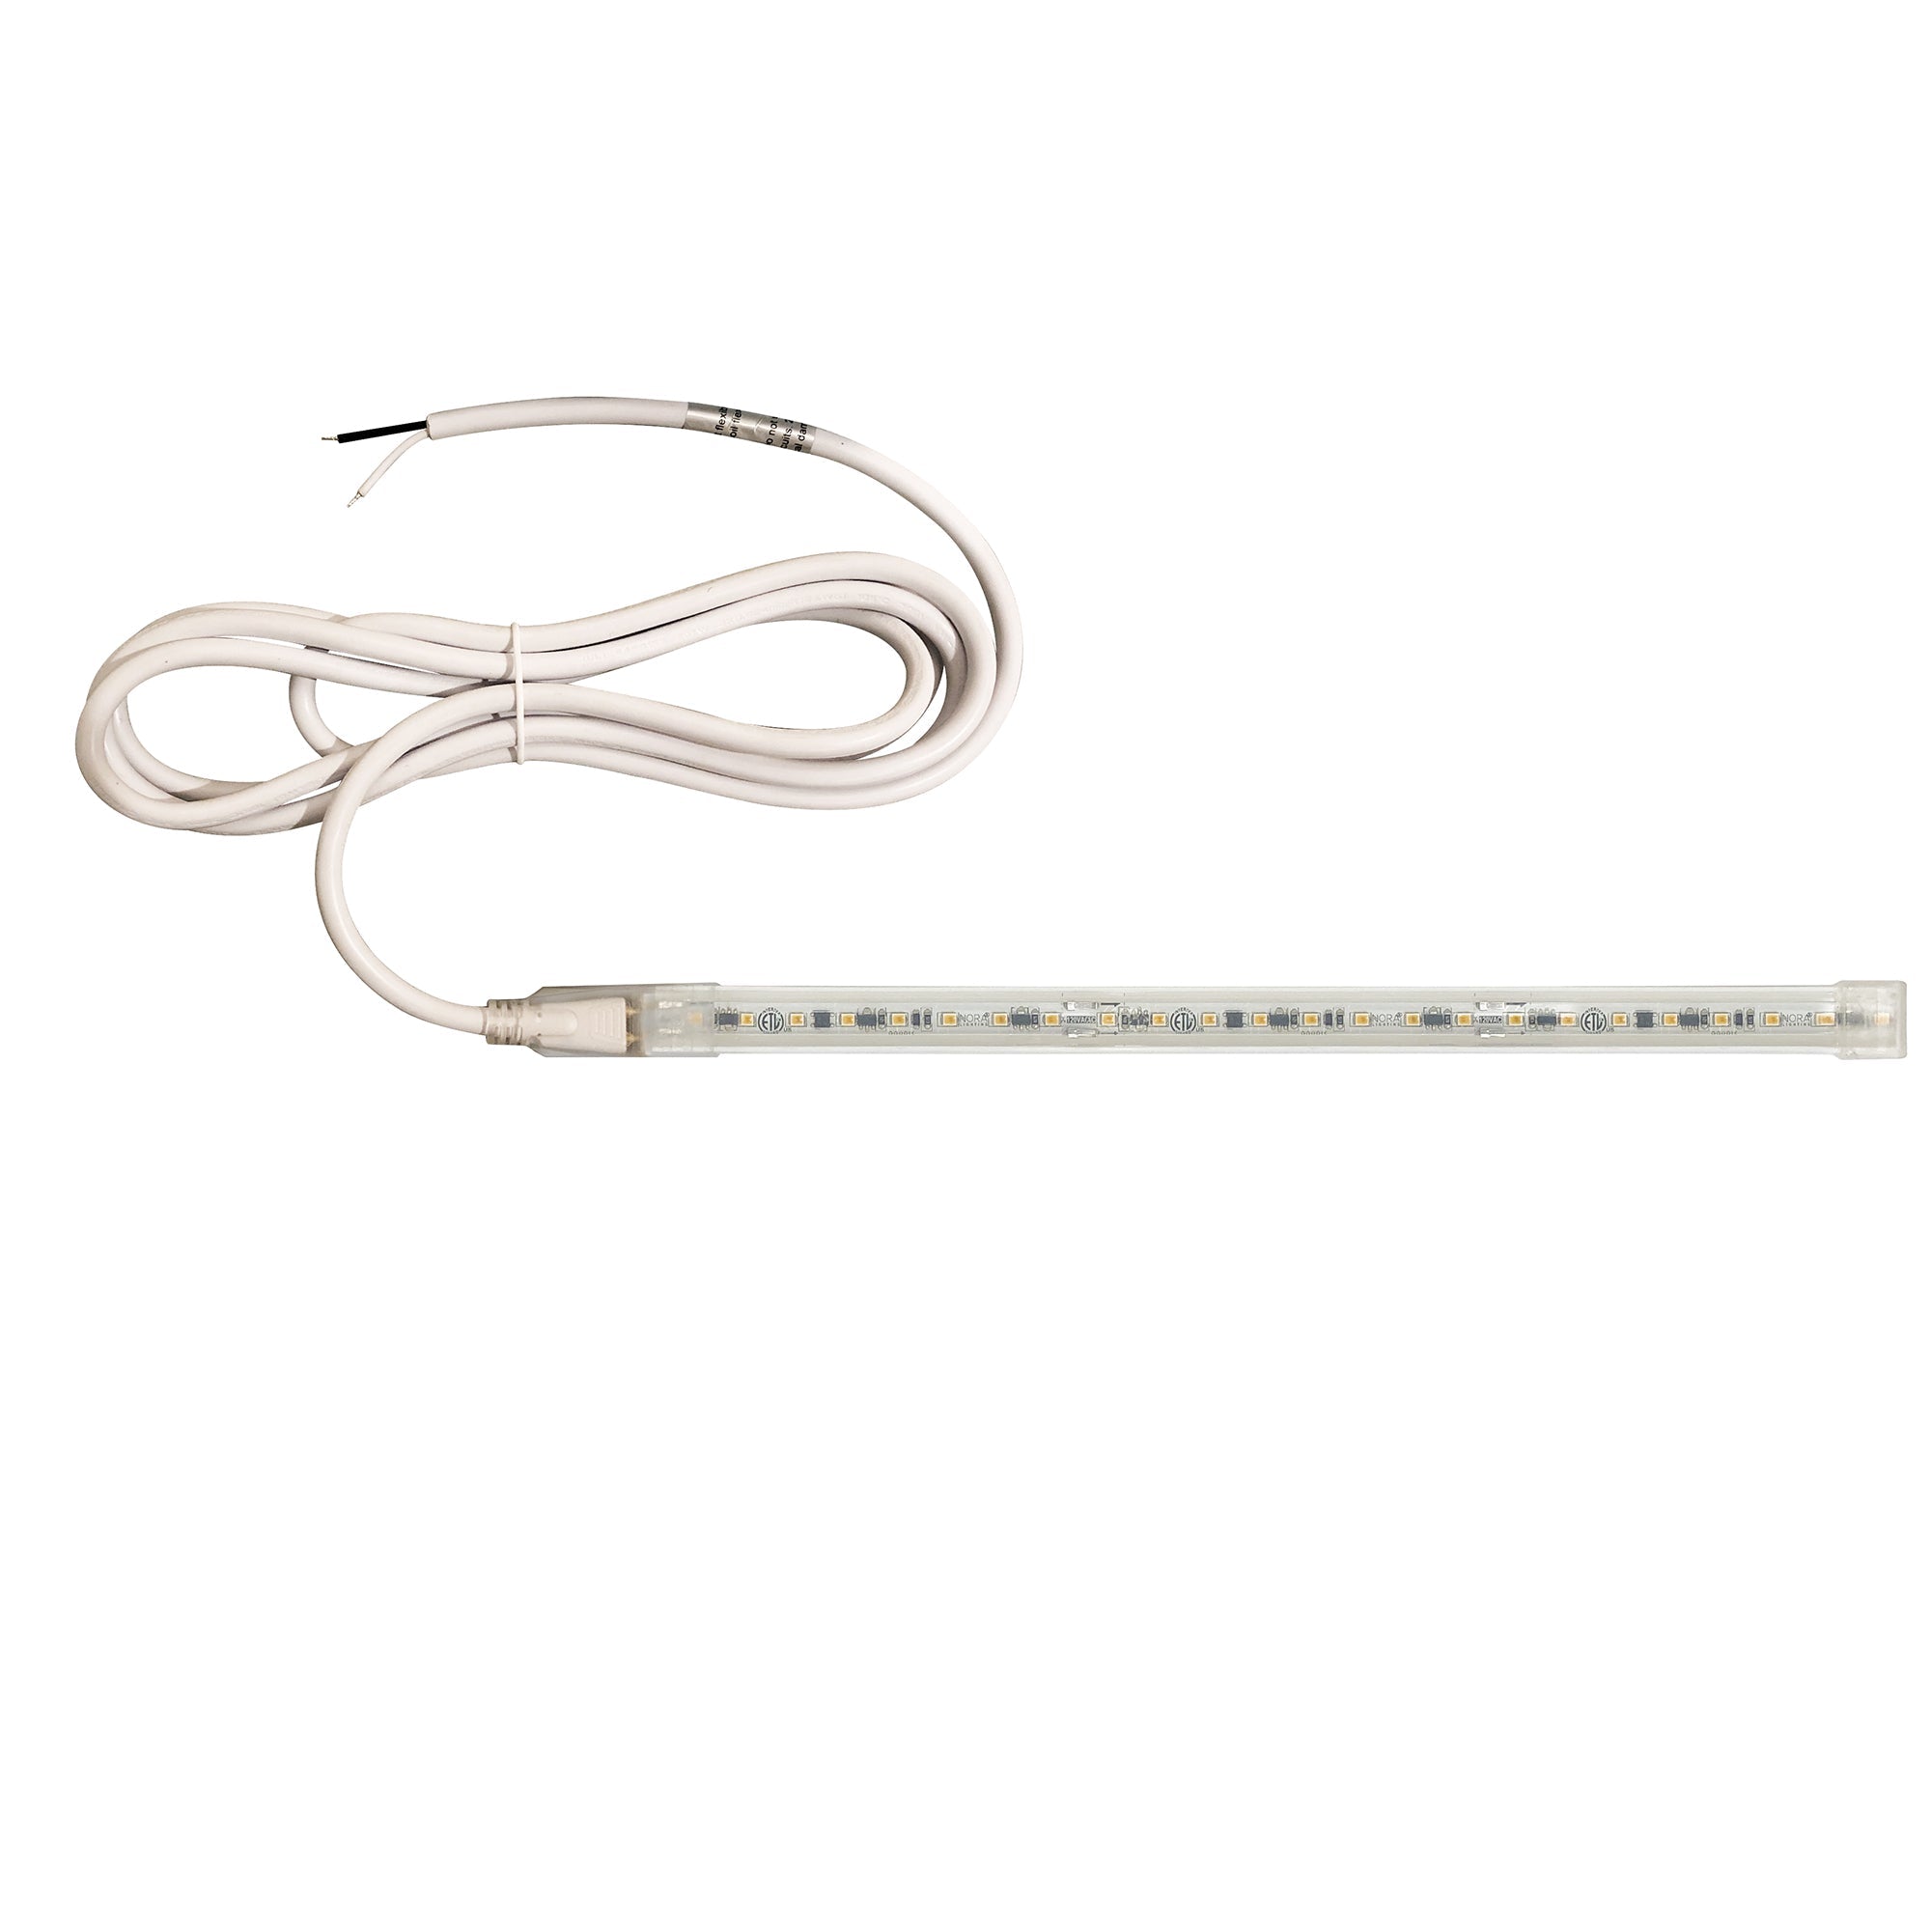 Nora Lighting NUTP13-W70-12-940/HW - Accent / Undercabinet - Custom Cut 70-ft 120V Continuous LED Tape Light, 330lm / 3.6W per foot, 4000K, w/ Mounting Clips and 8' Hardwired Power Cord